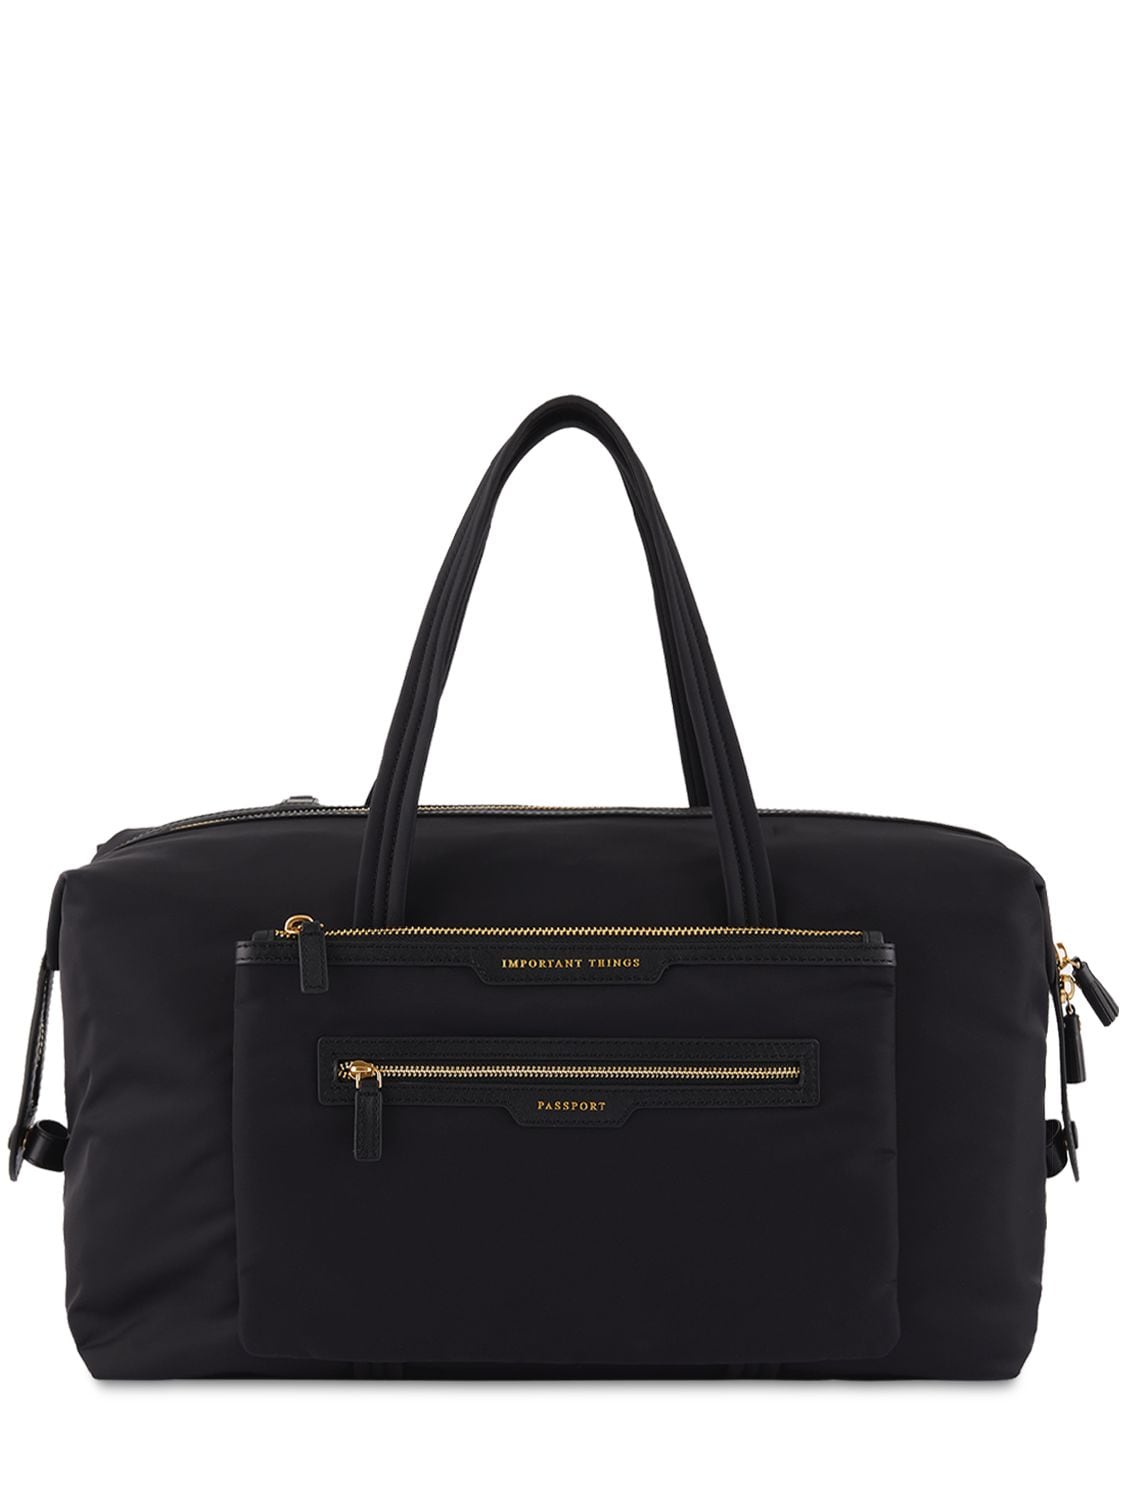 Anya Hindmarch Recycled Nylon Inflight Shoulder Bag In Black